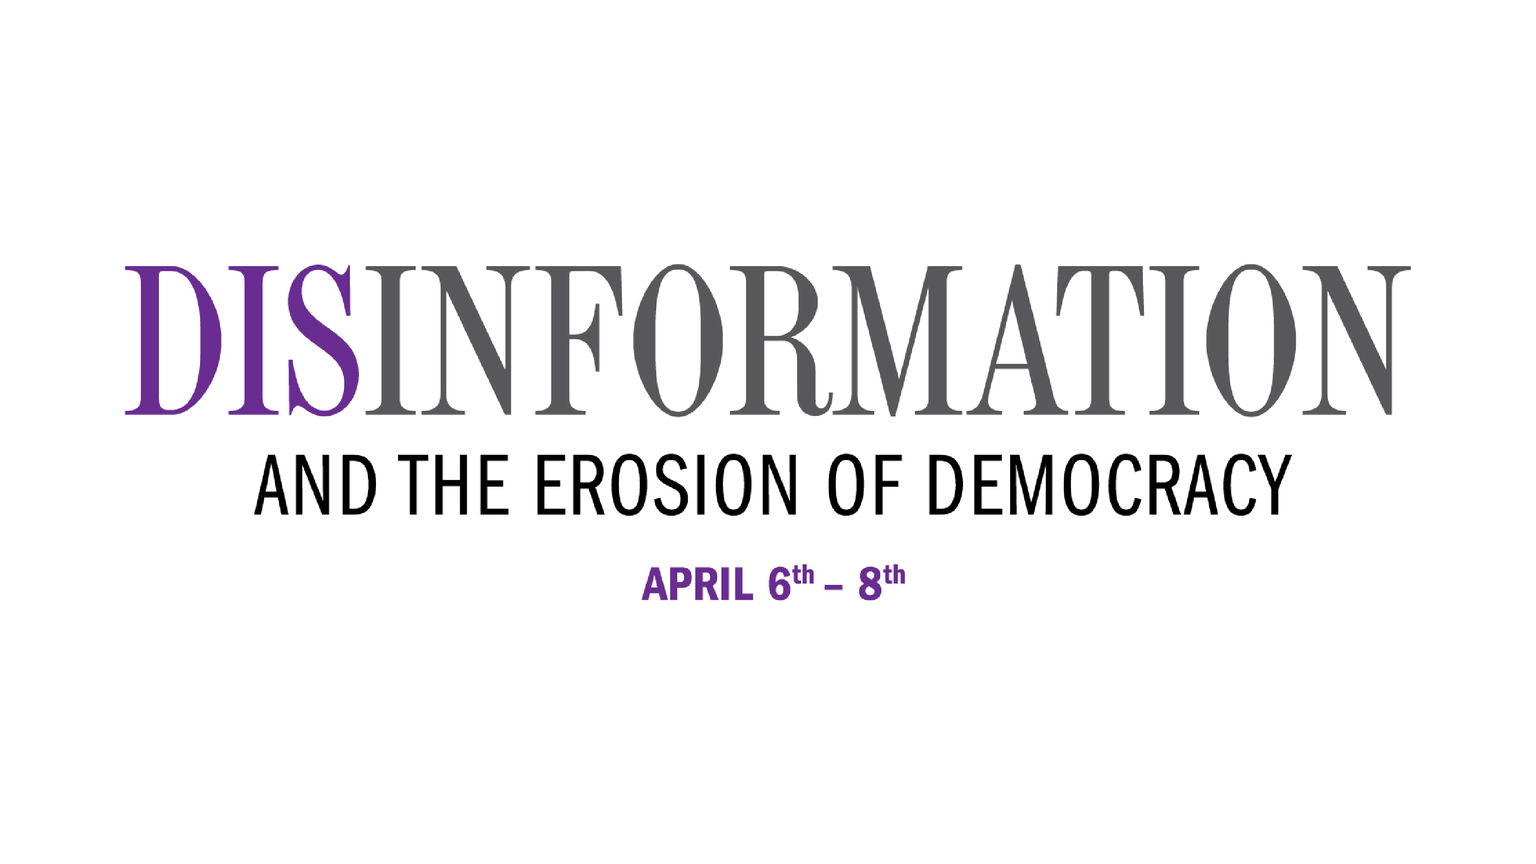 Disinformation and the Erosion of Democracy
